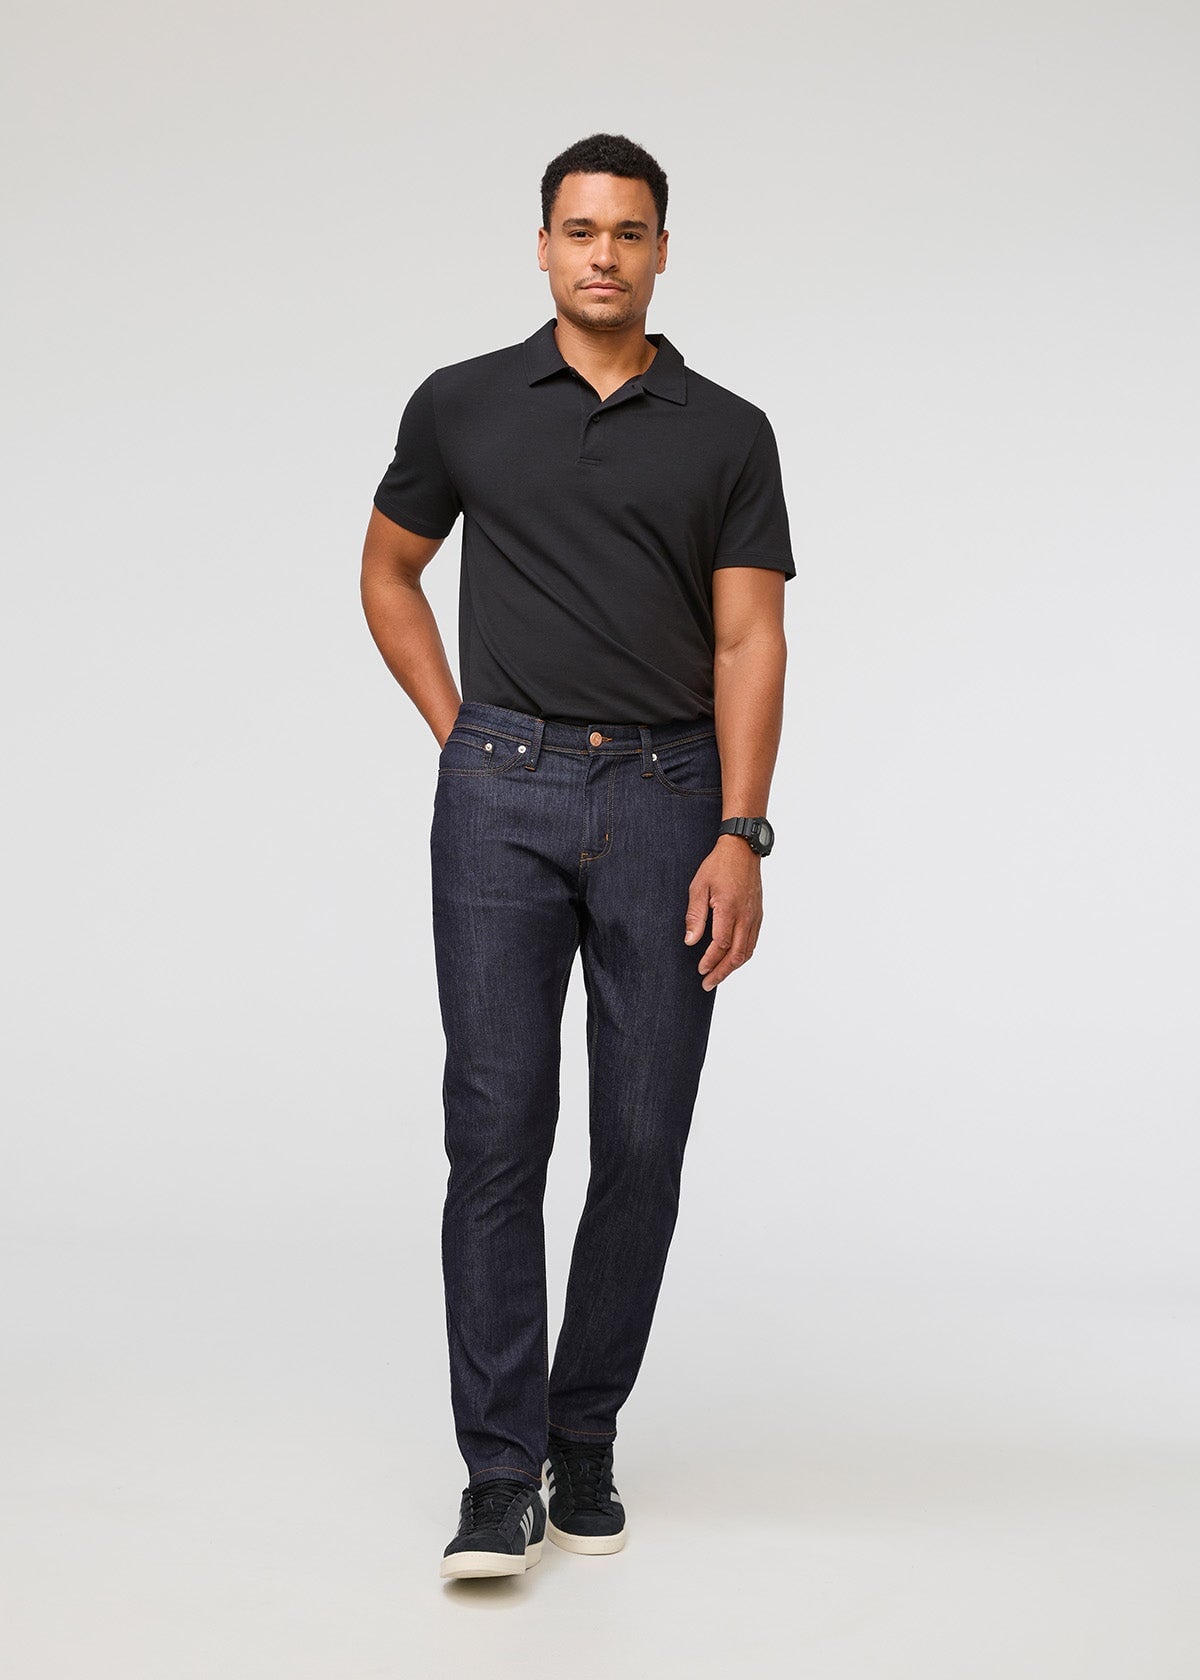 Men's Relaxed Fit Pants & Jeans - DUER